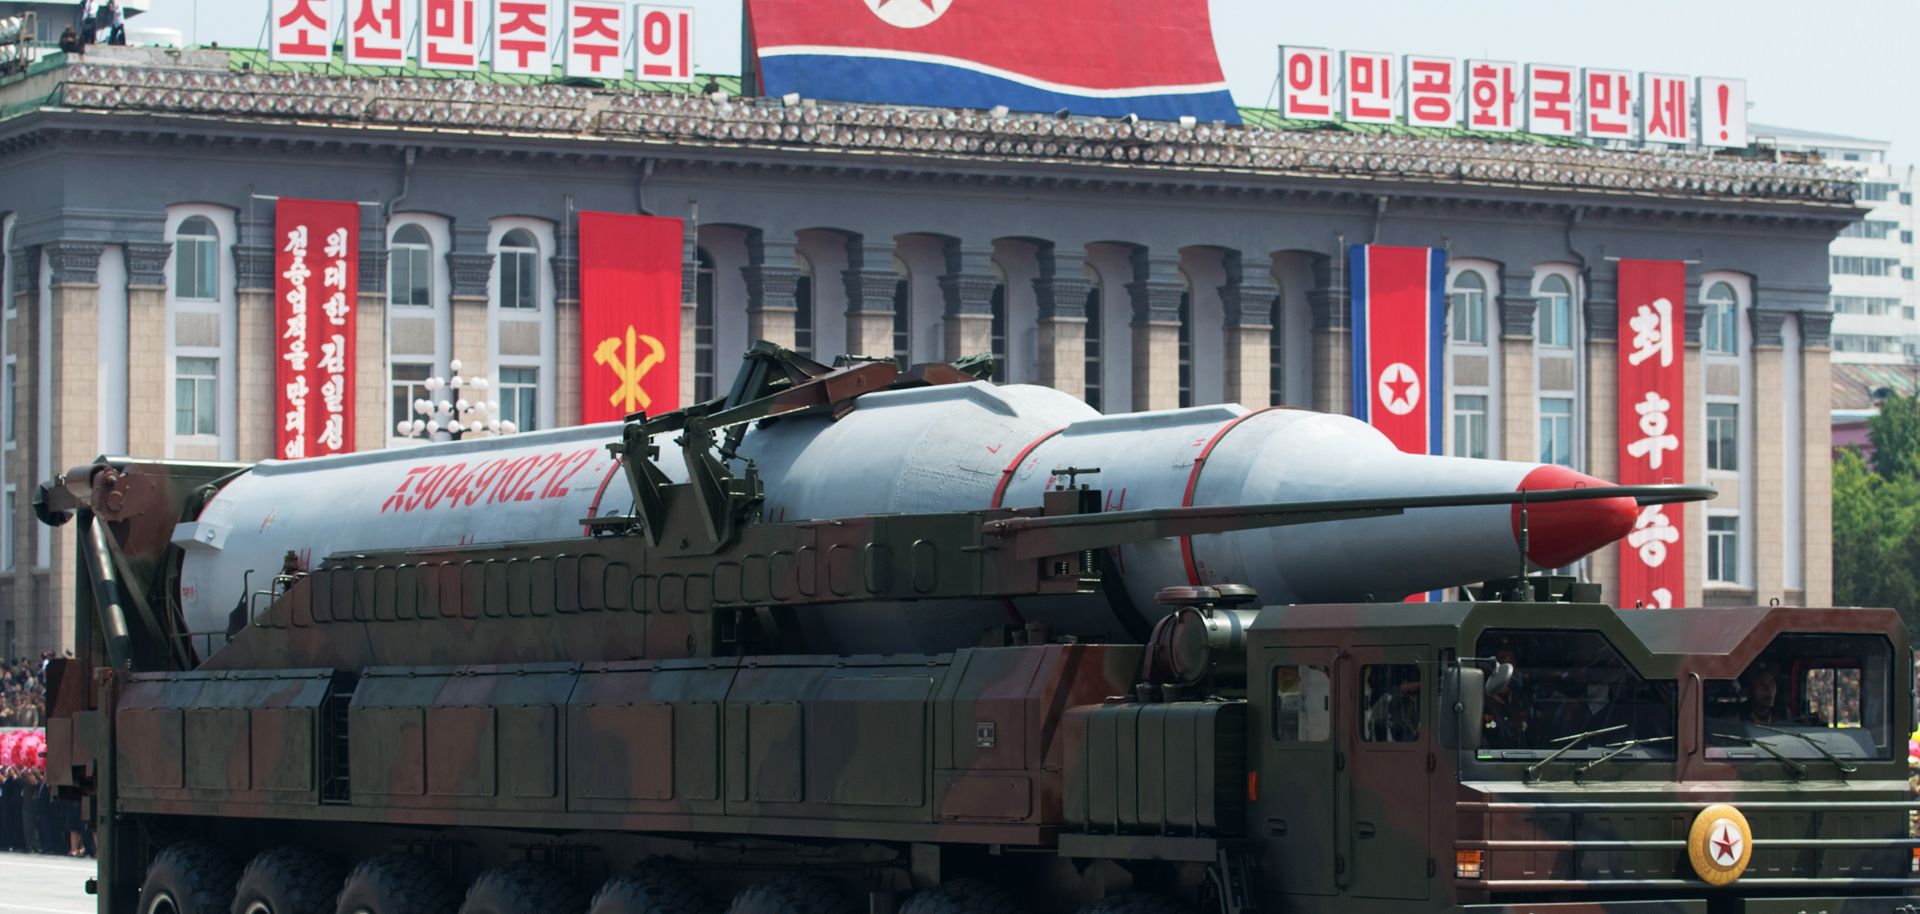 A North Korean Taepodong-class missile is displayed during a military parade marking the 60th anniversary of the Korean war armistice in Pyongyang on July 27, 2013.